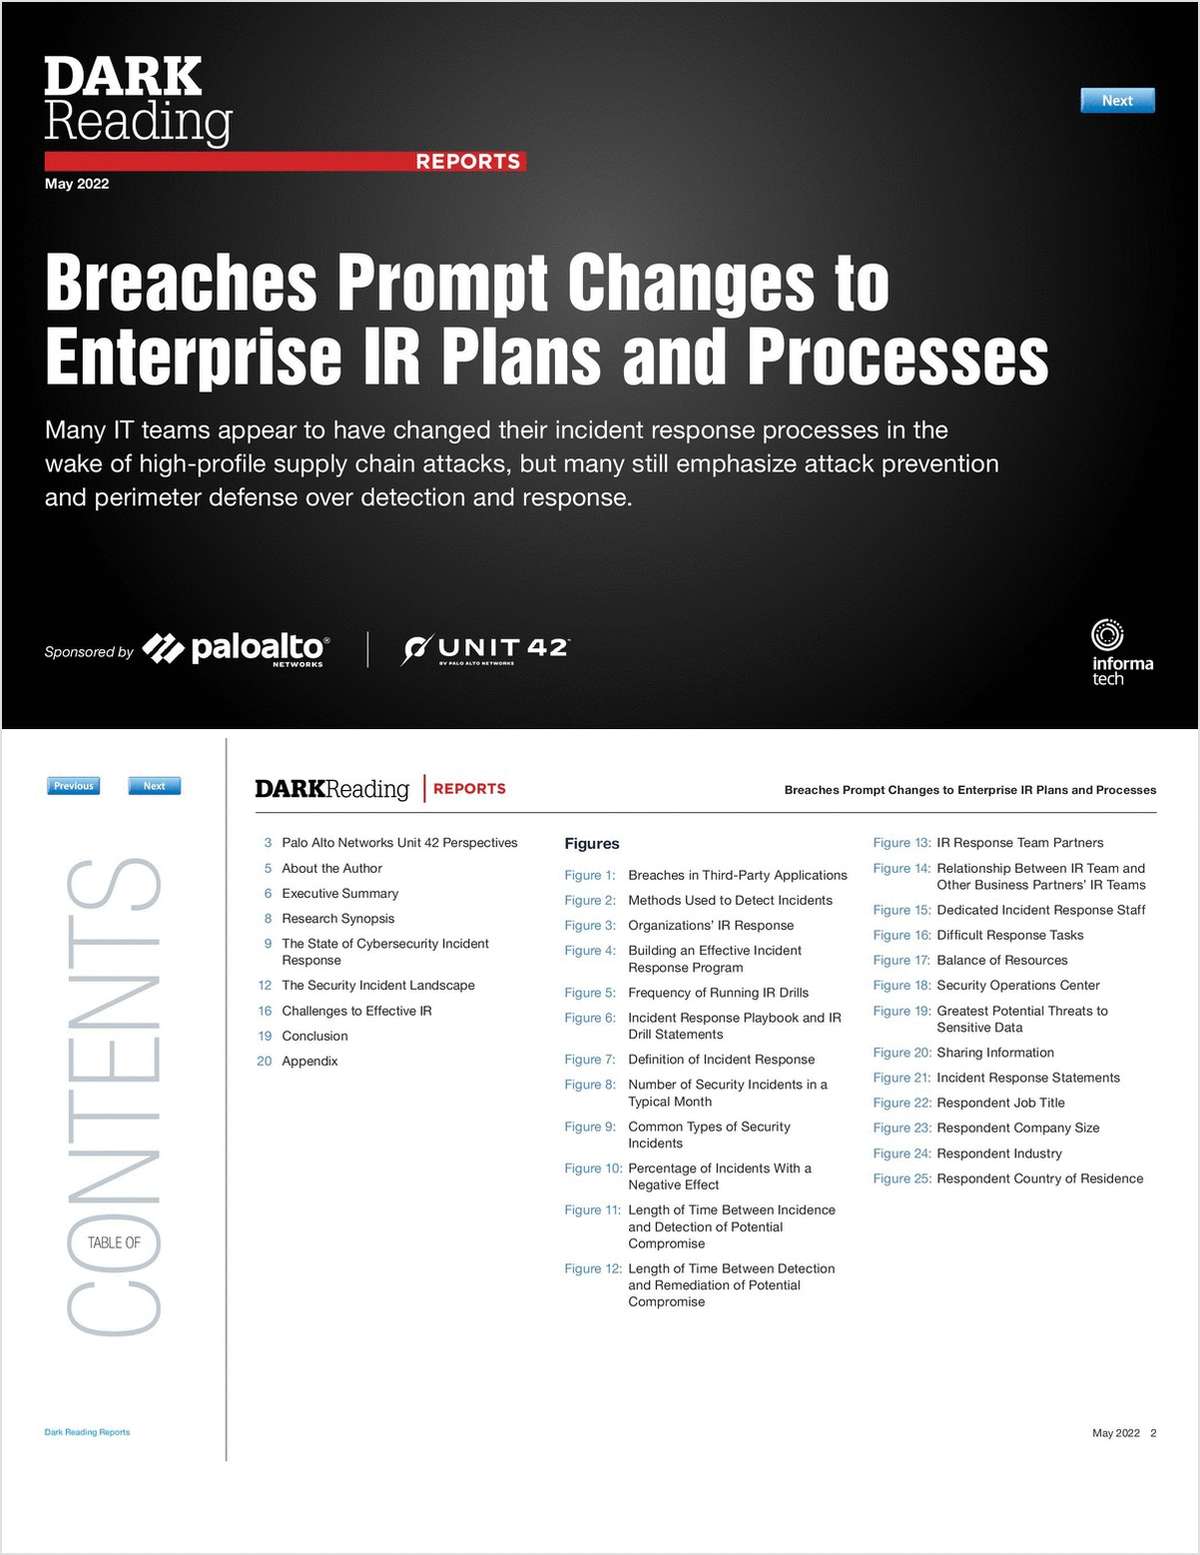 Breaches Prompt Changes to Enterprise IR Plans and Processes